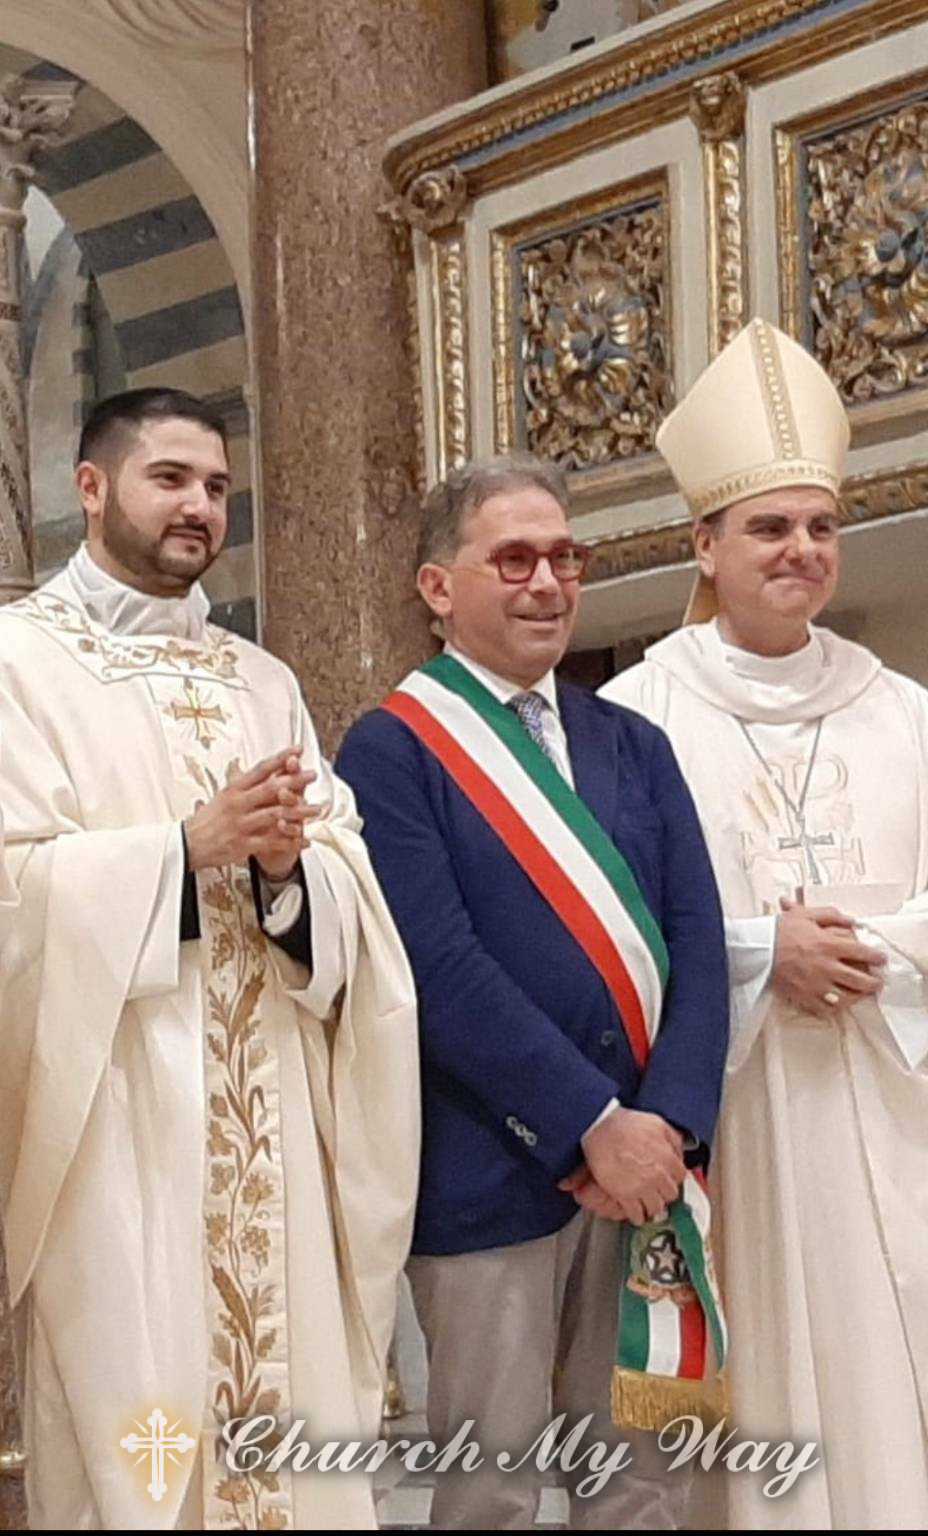 Minors celebrating Daniele Civale: a new priest ordained after 48 years